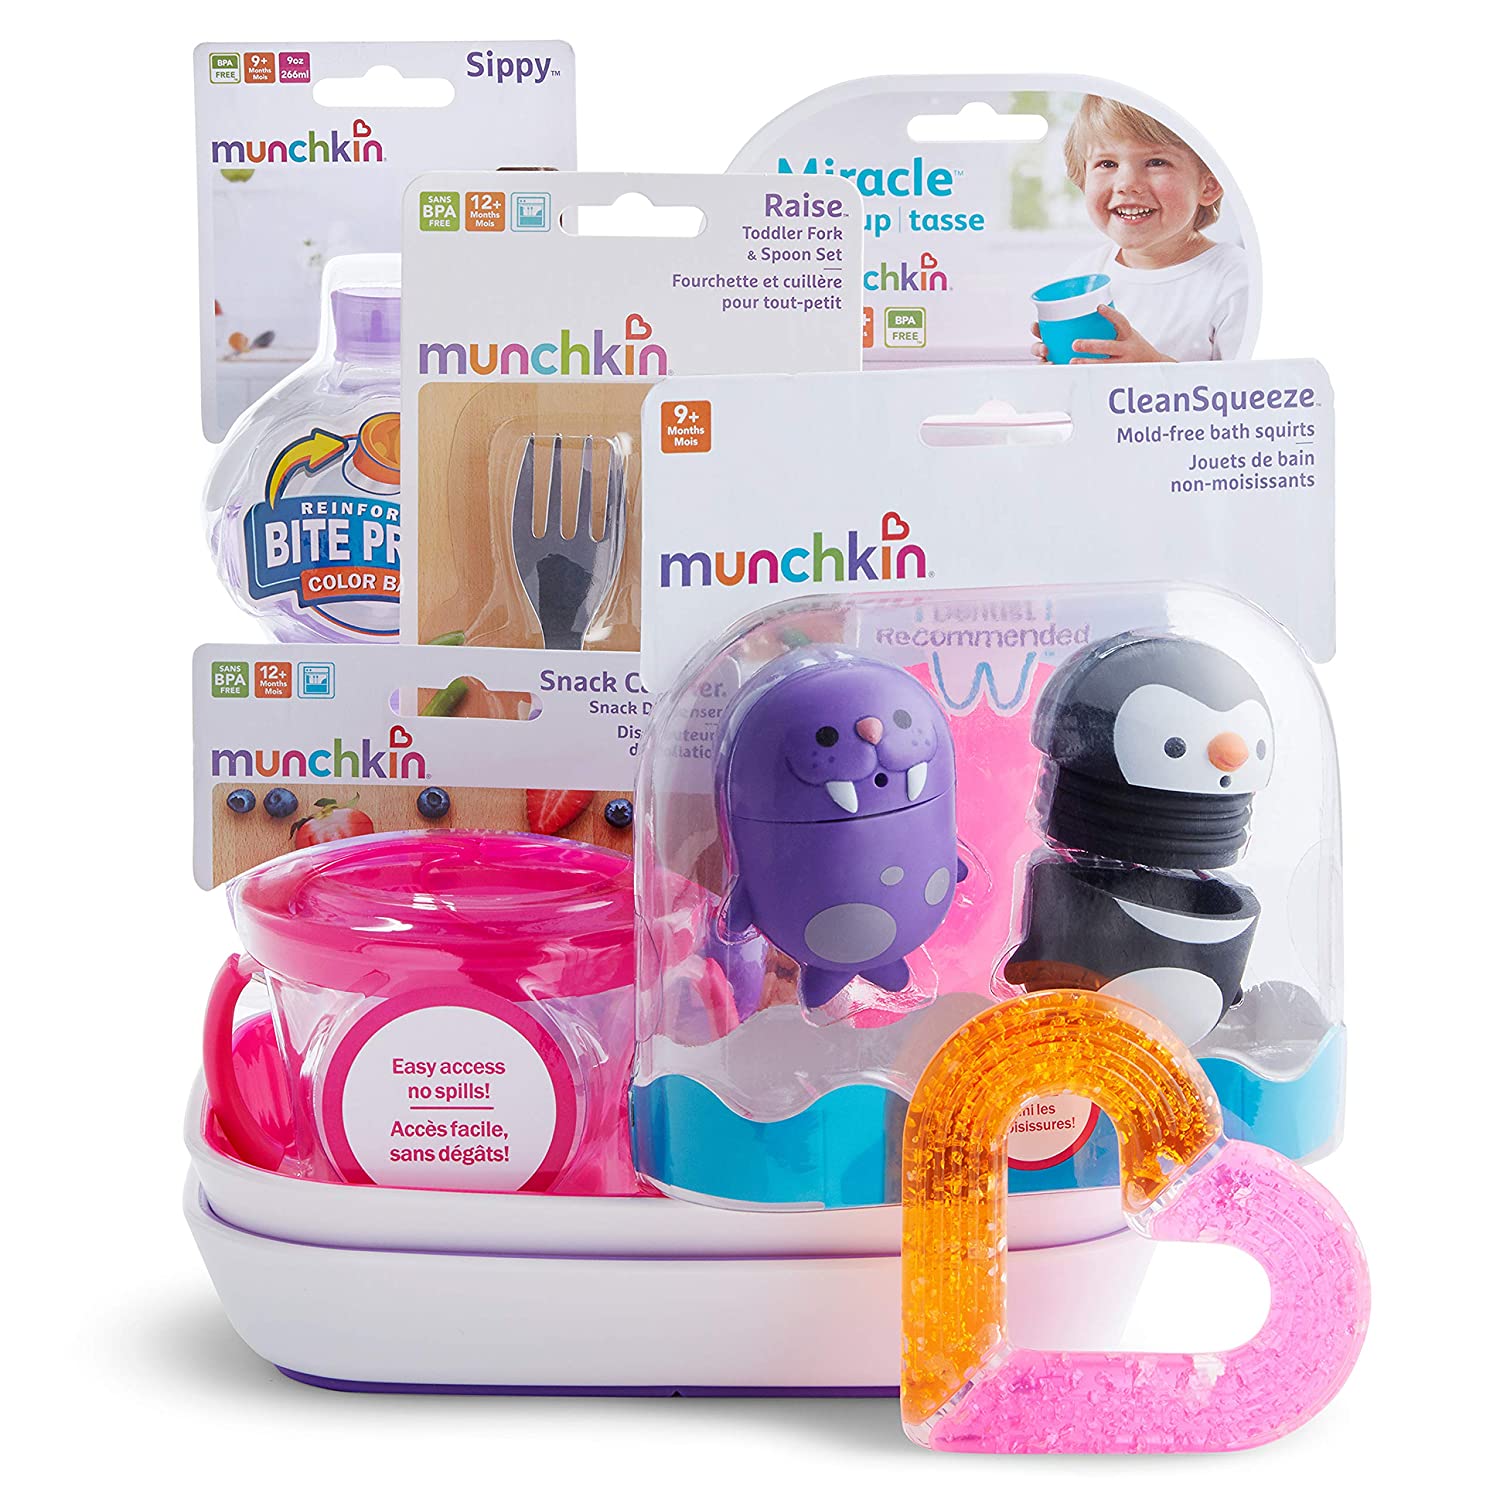 Munchkin 1st Birthday Gift Basket, Great for Baby Birthdays, Includes 7 Baby Products, Pink